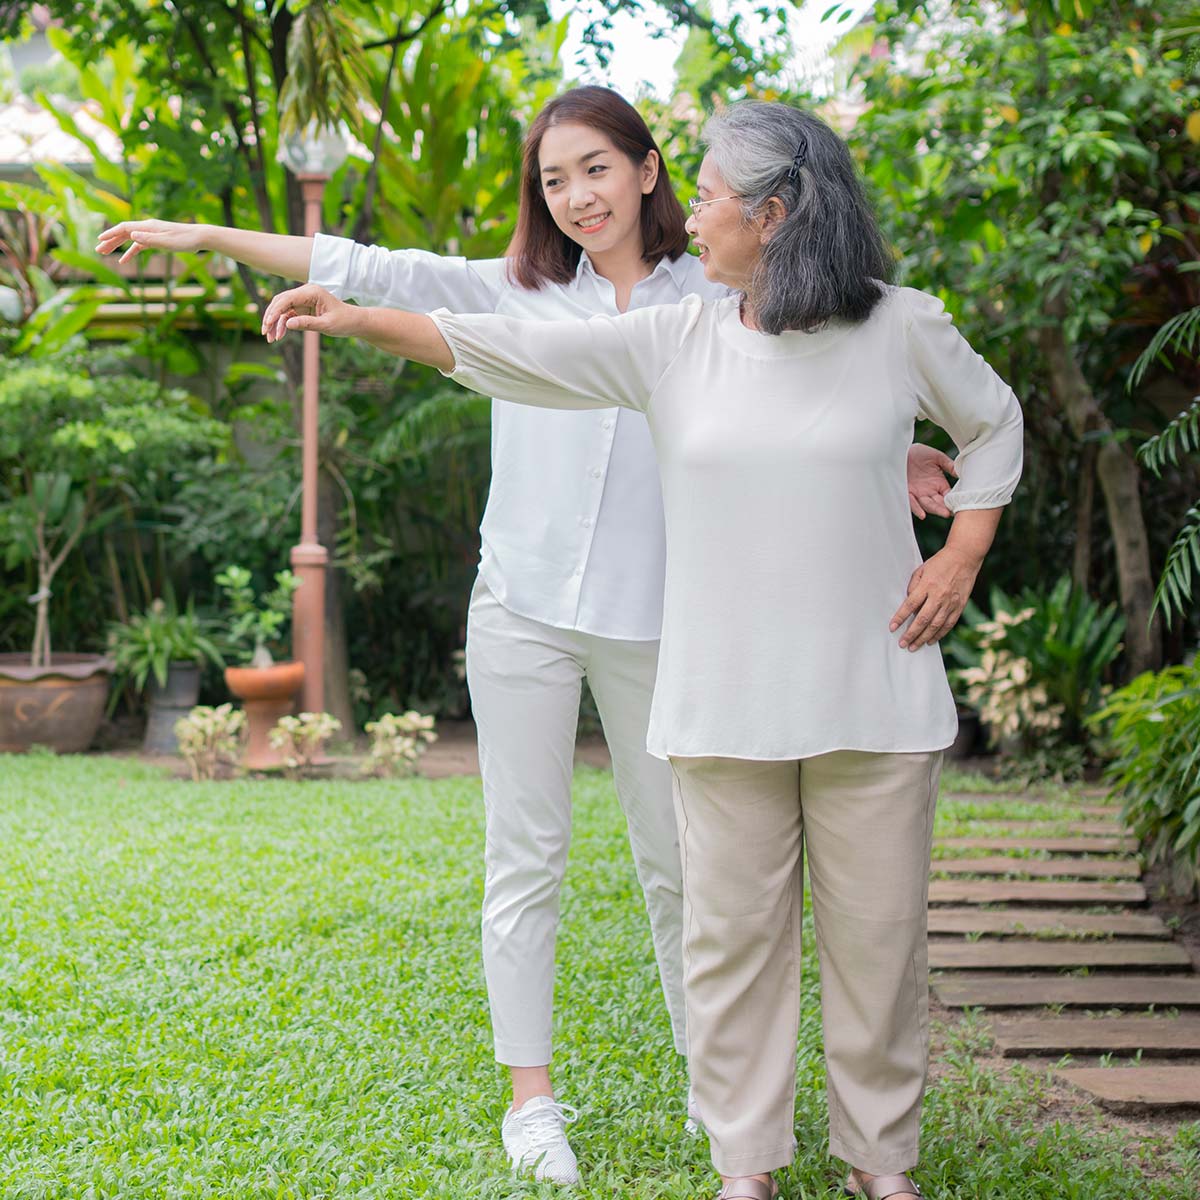 image of caregiver helping elderly patient get exercise outside